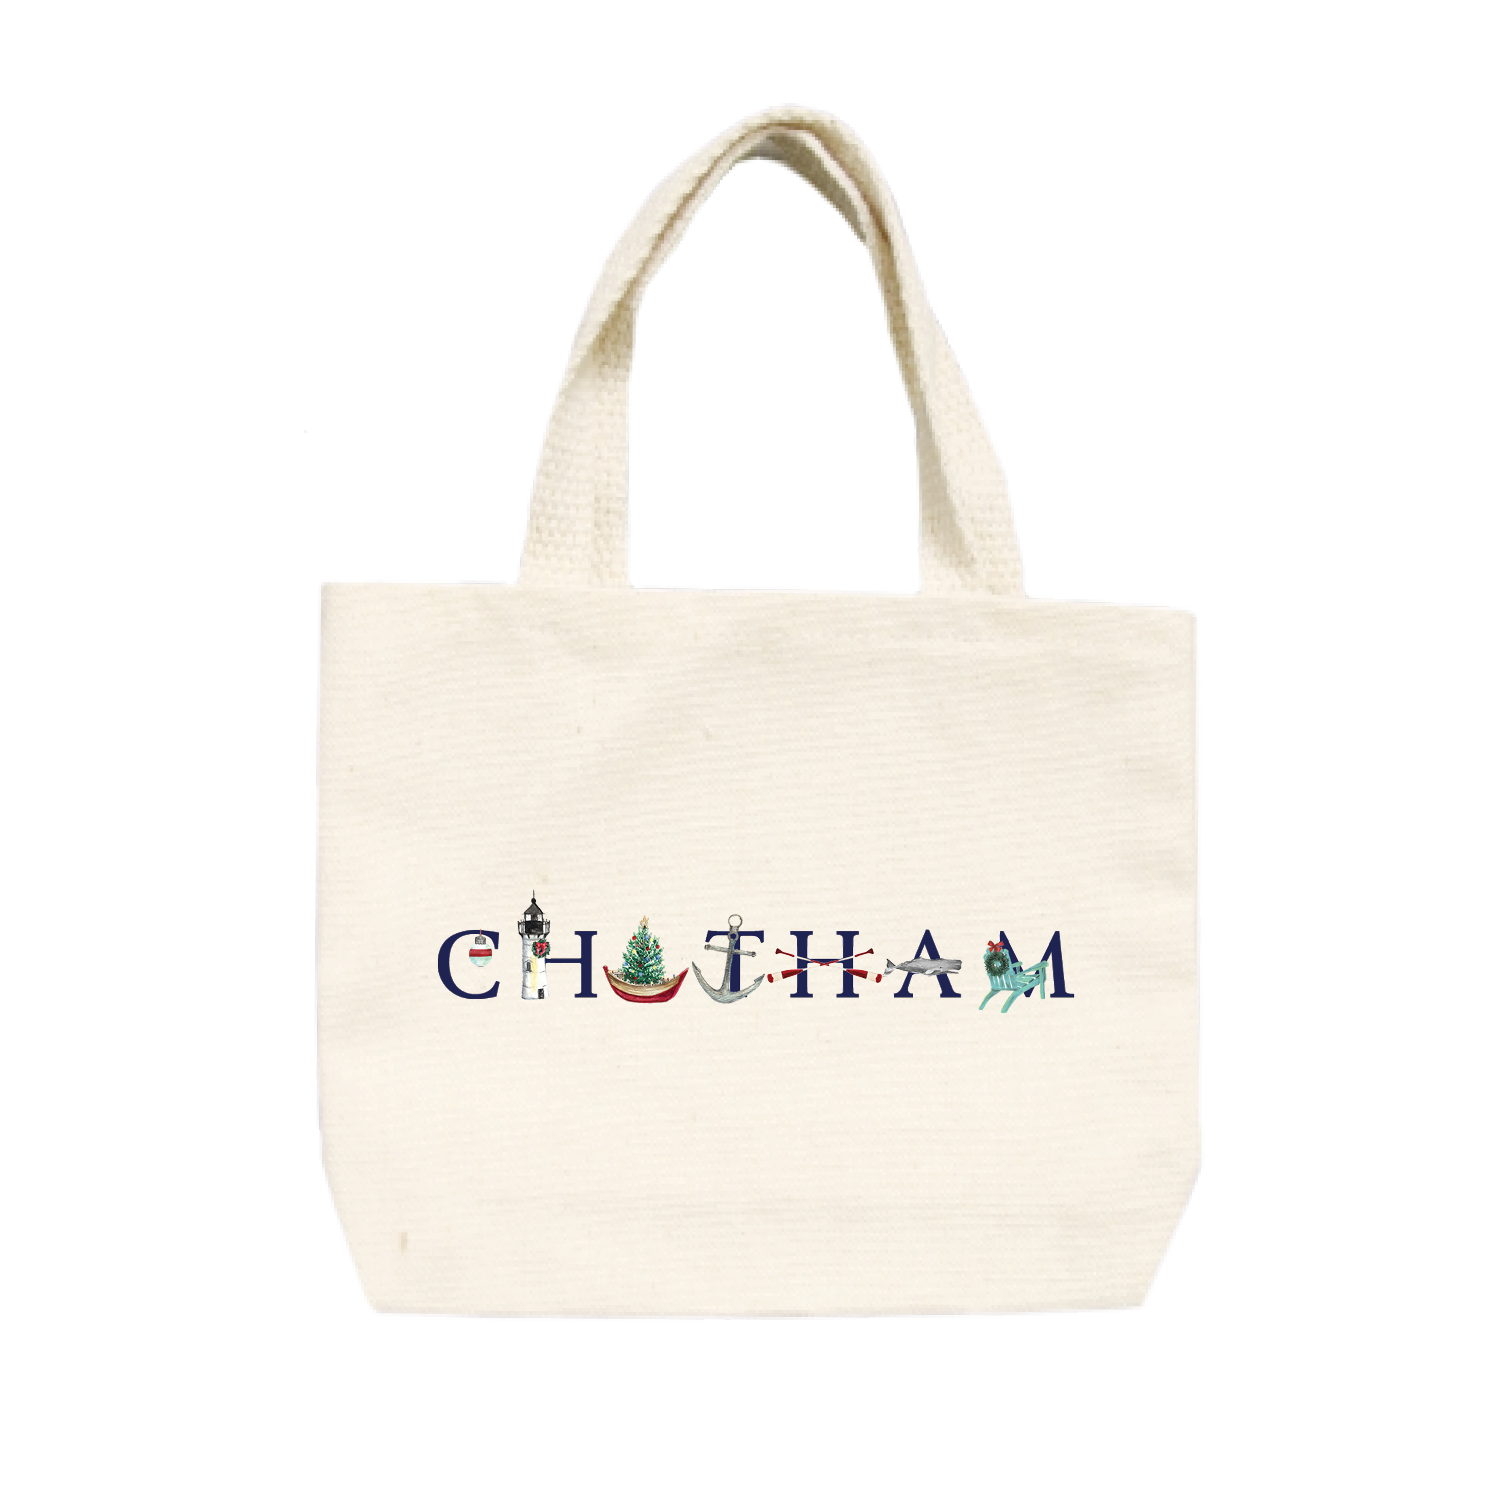 Chatham winter small tote